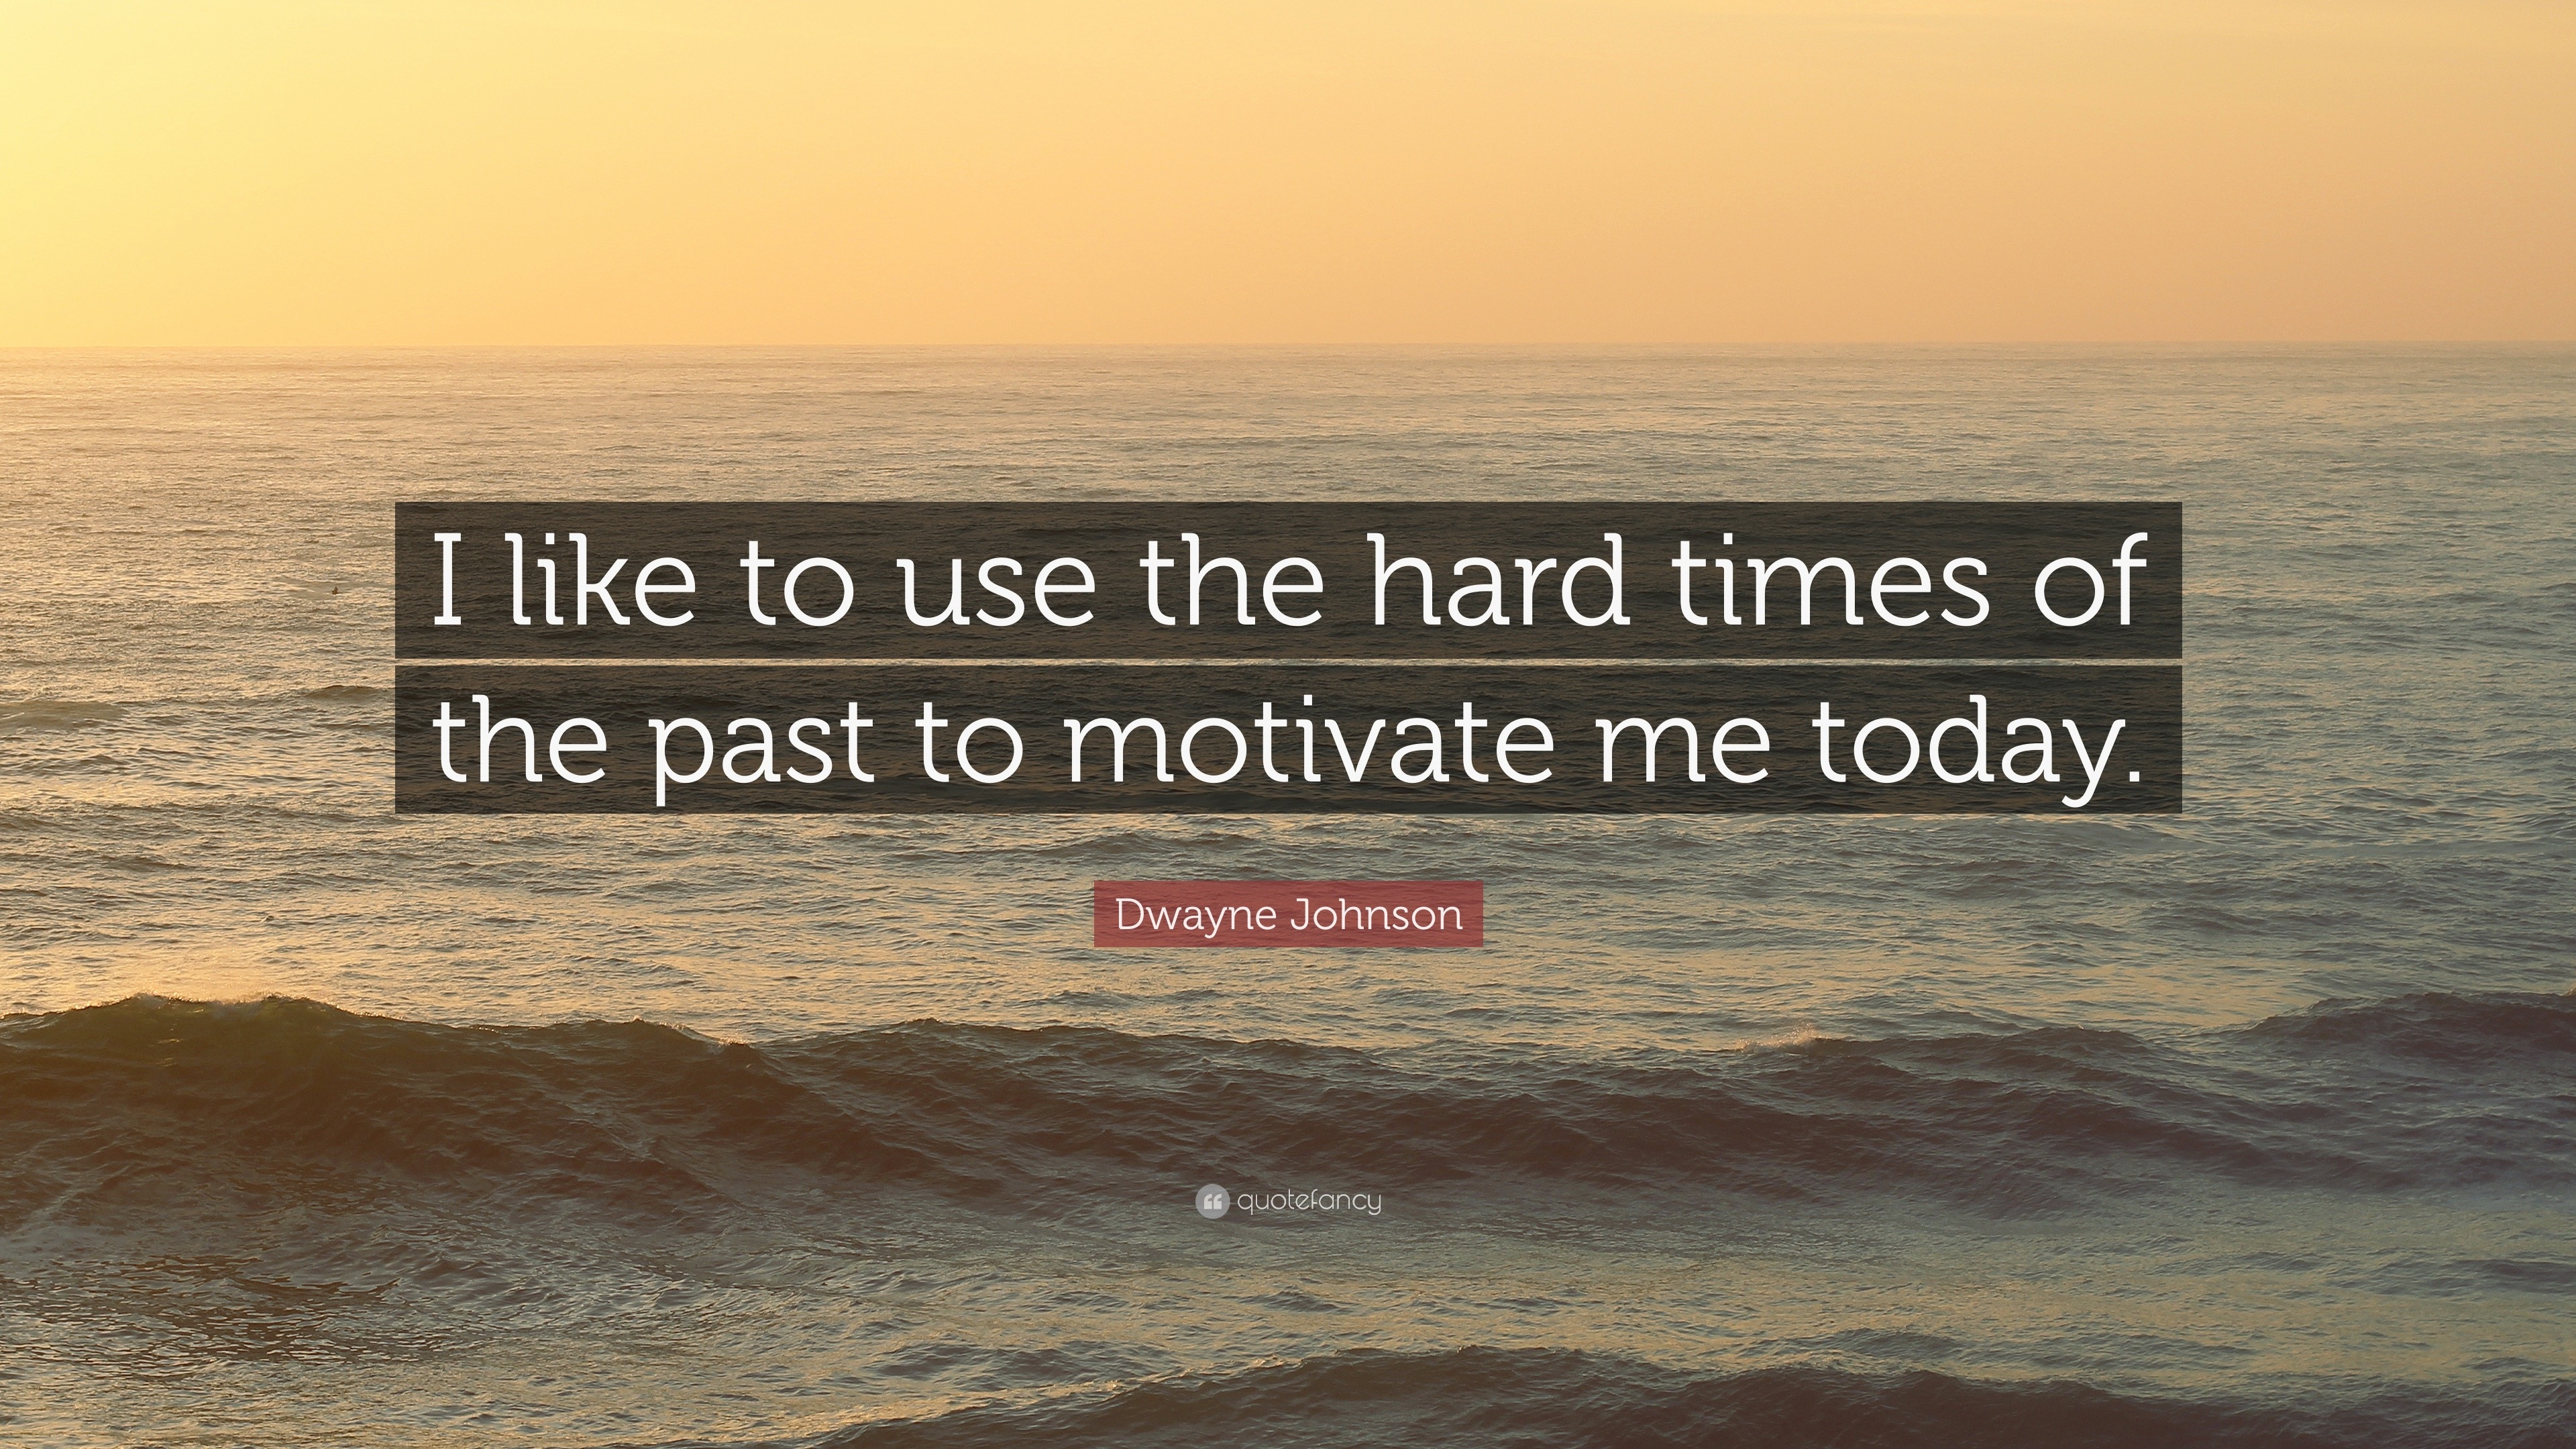 Dwayne Johnson Quote: “I like to use the hard times of the past to